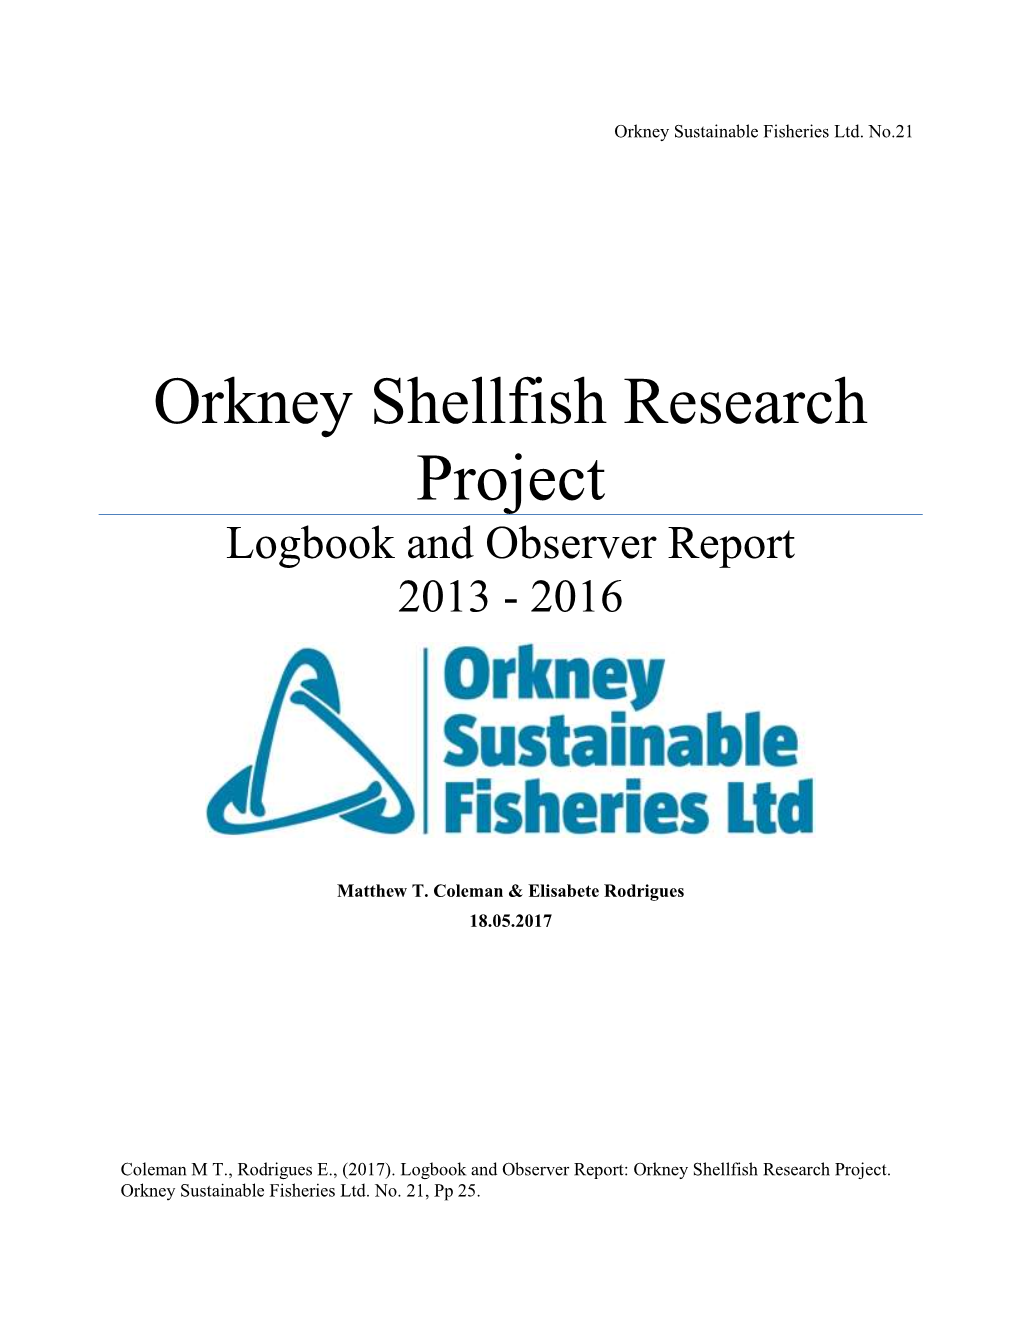 Logbook and Observer Report 2013 - 2016